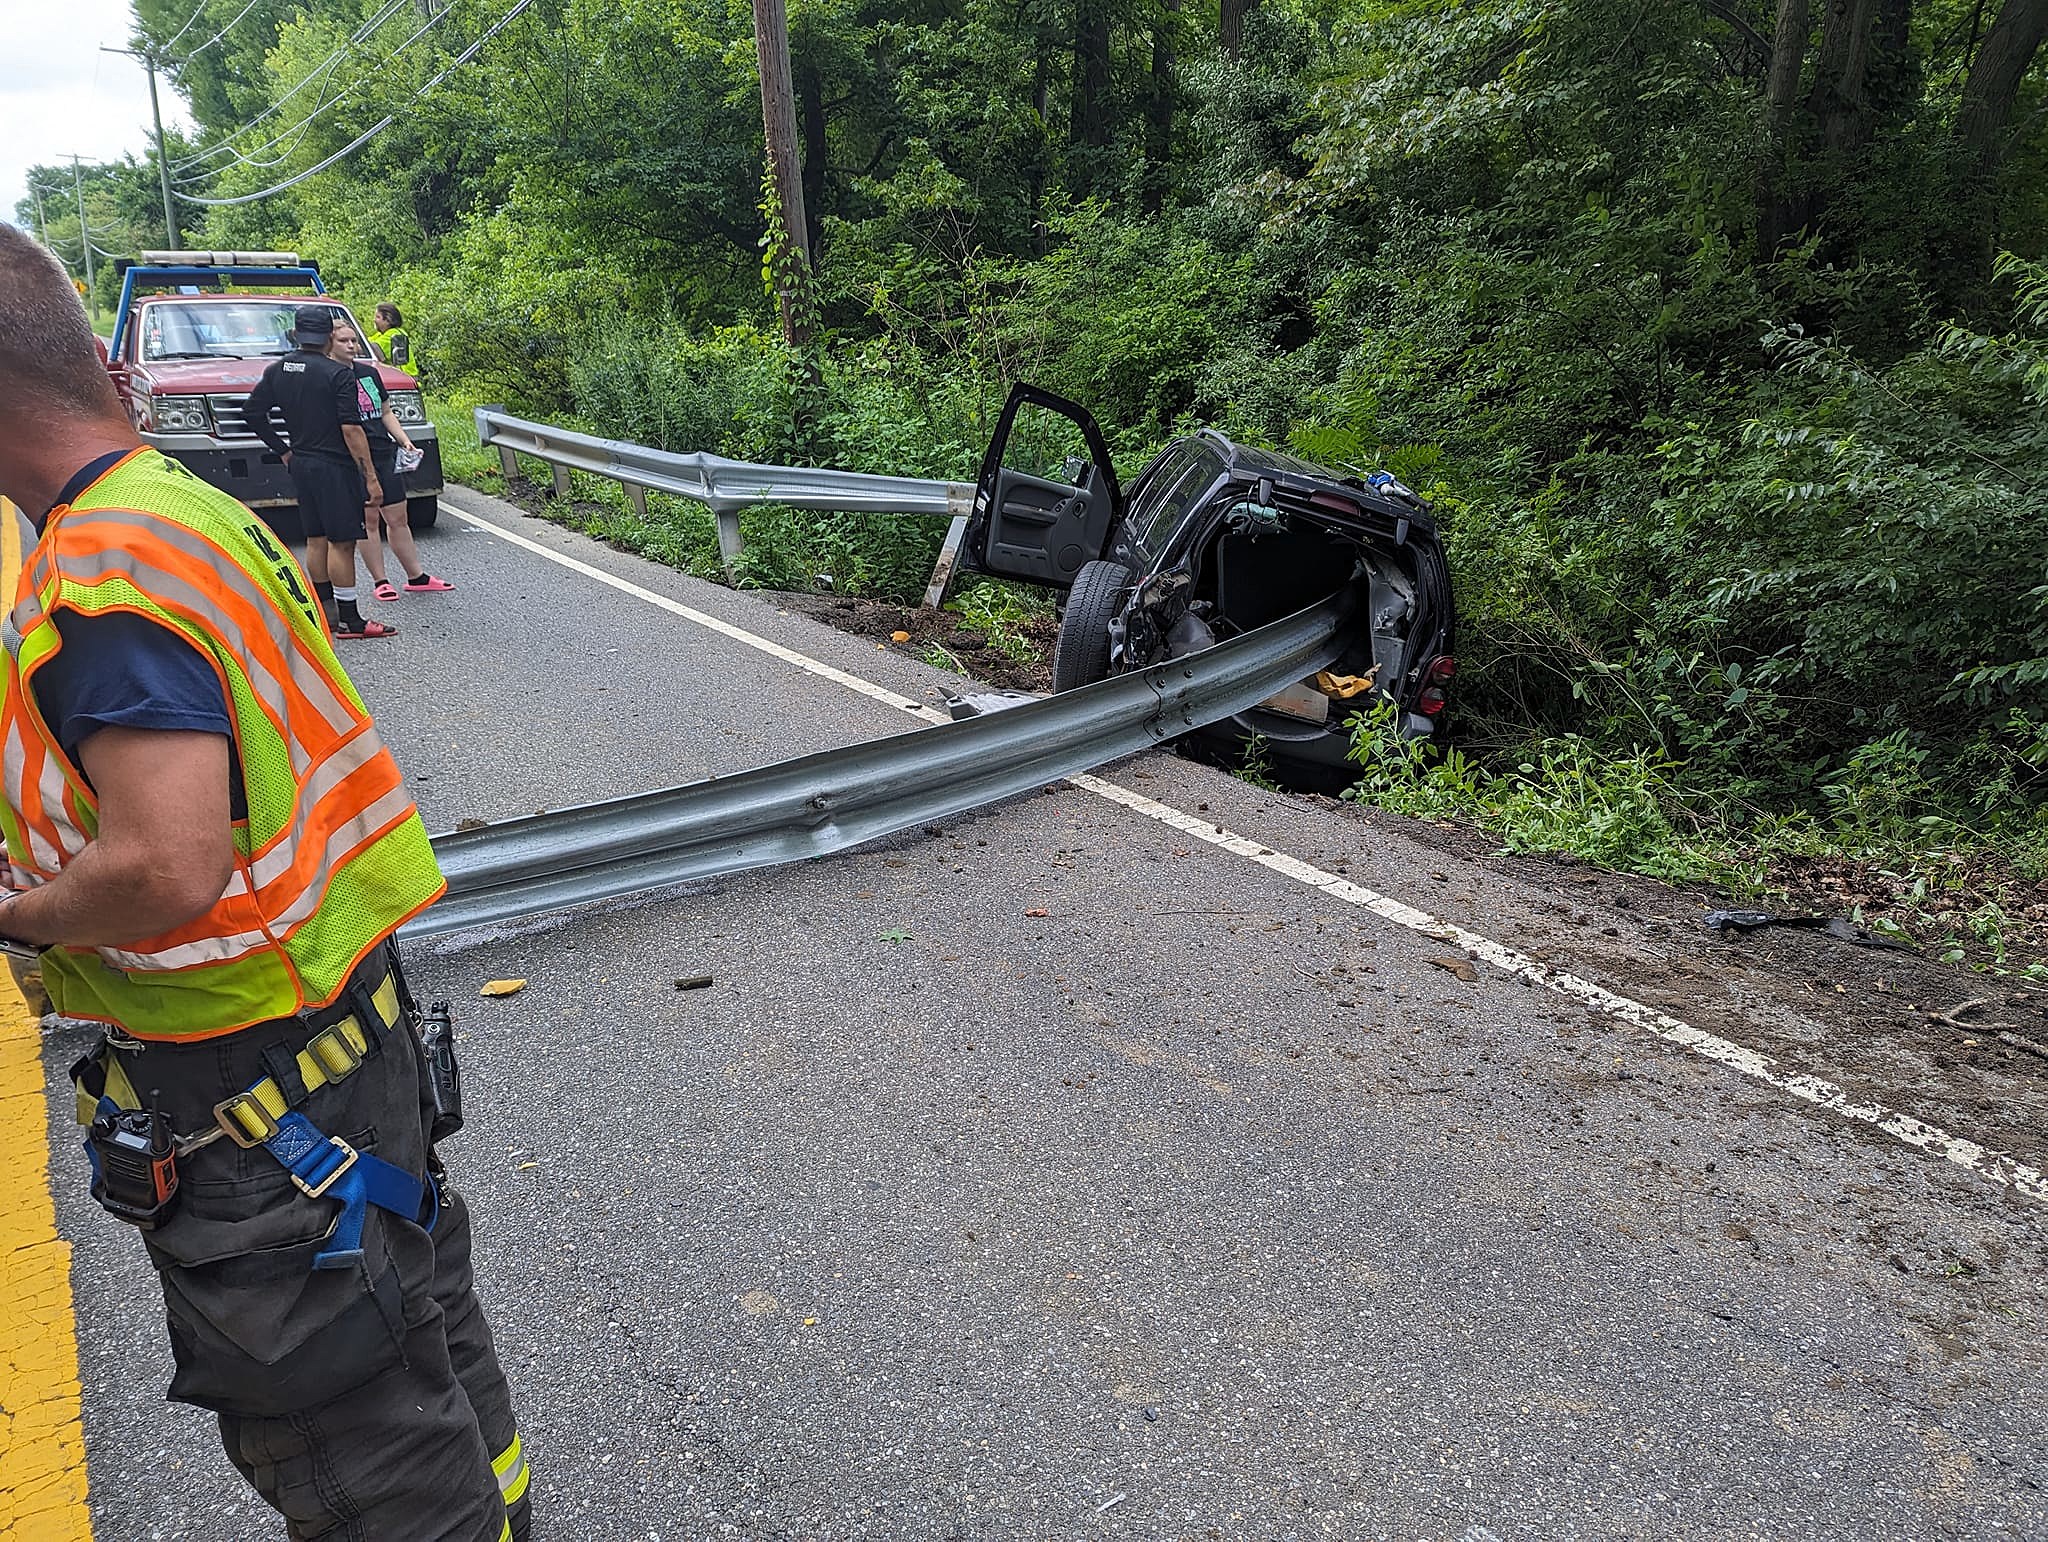 A guardrail protrudes from an SUV after an accident in Roosevelt, NJ. Photo: Millstone Township Fire Department via Facebook